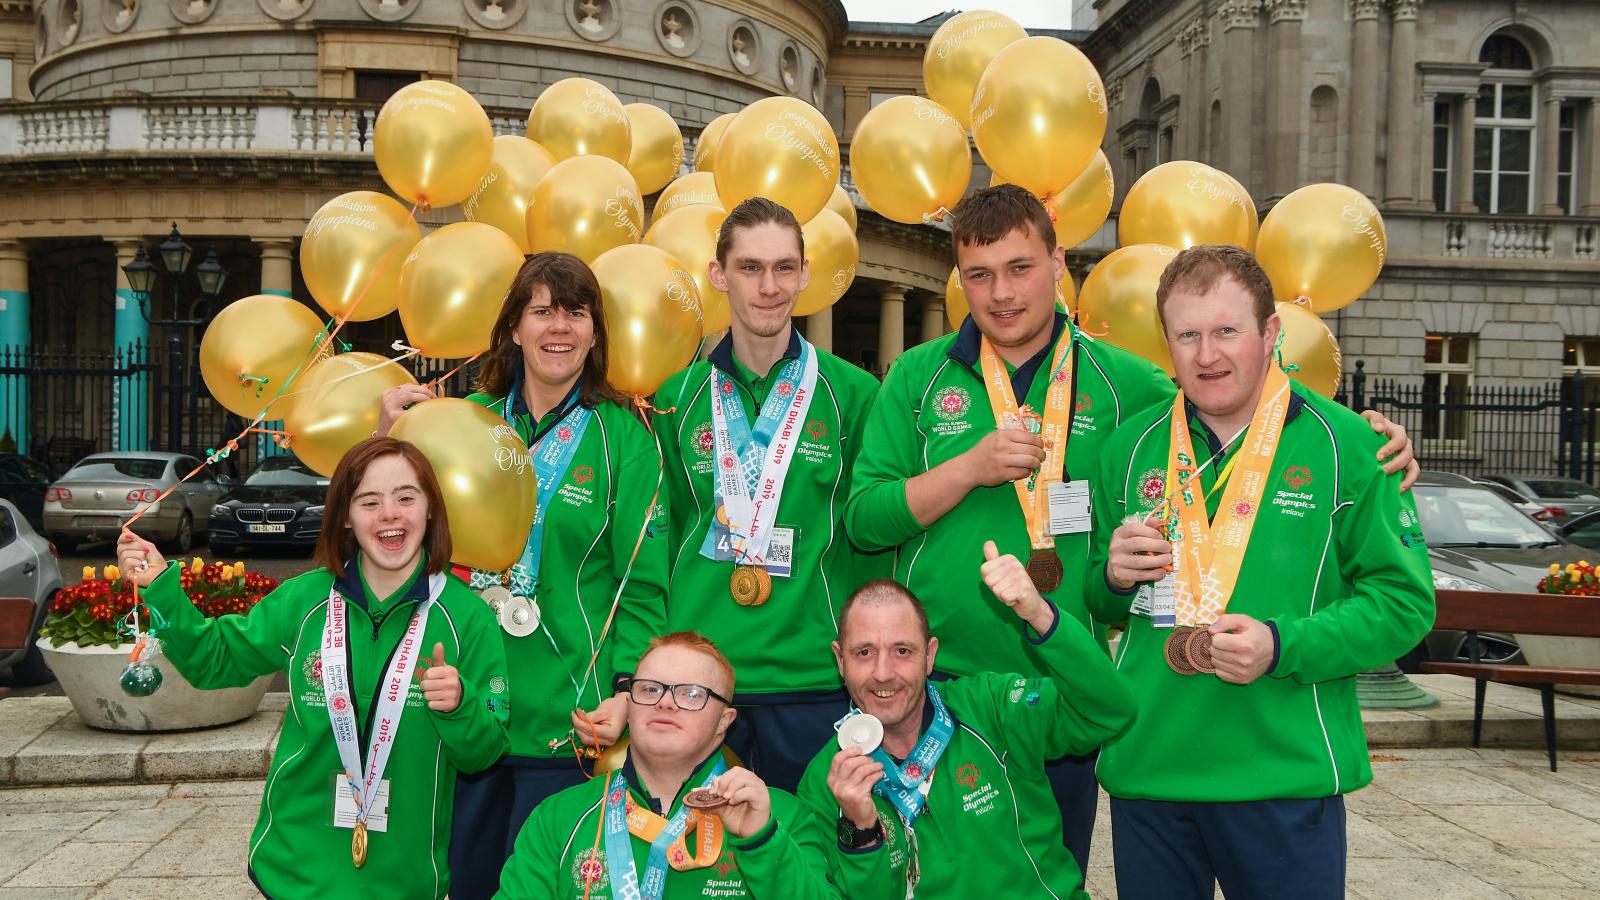 Special Olympics athletes wearing medals and holding balloons